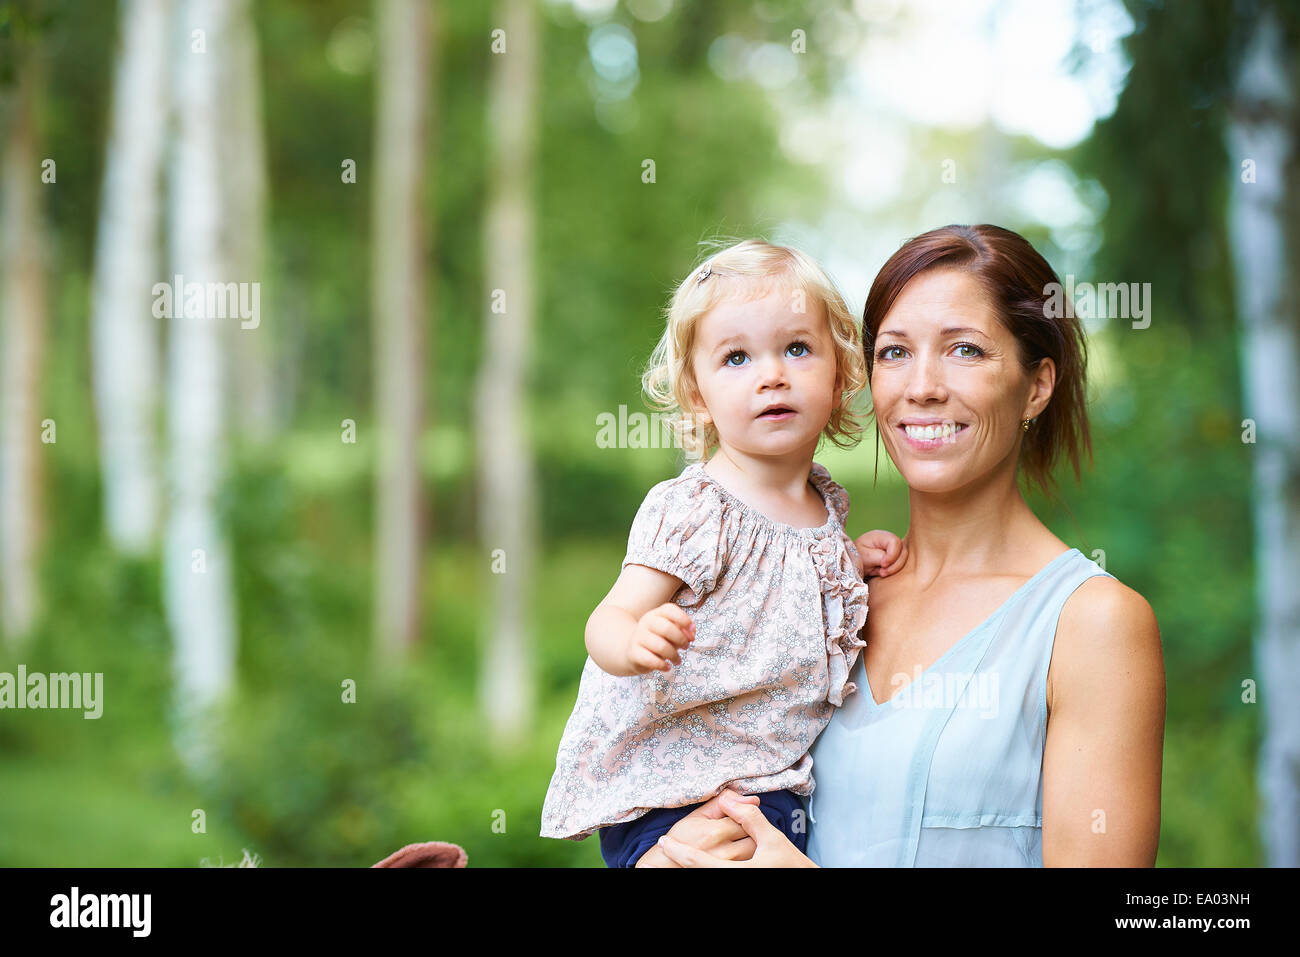 Portrait of mid adult woman and toddler daughter in garden Banque D'Images